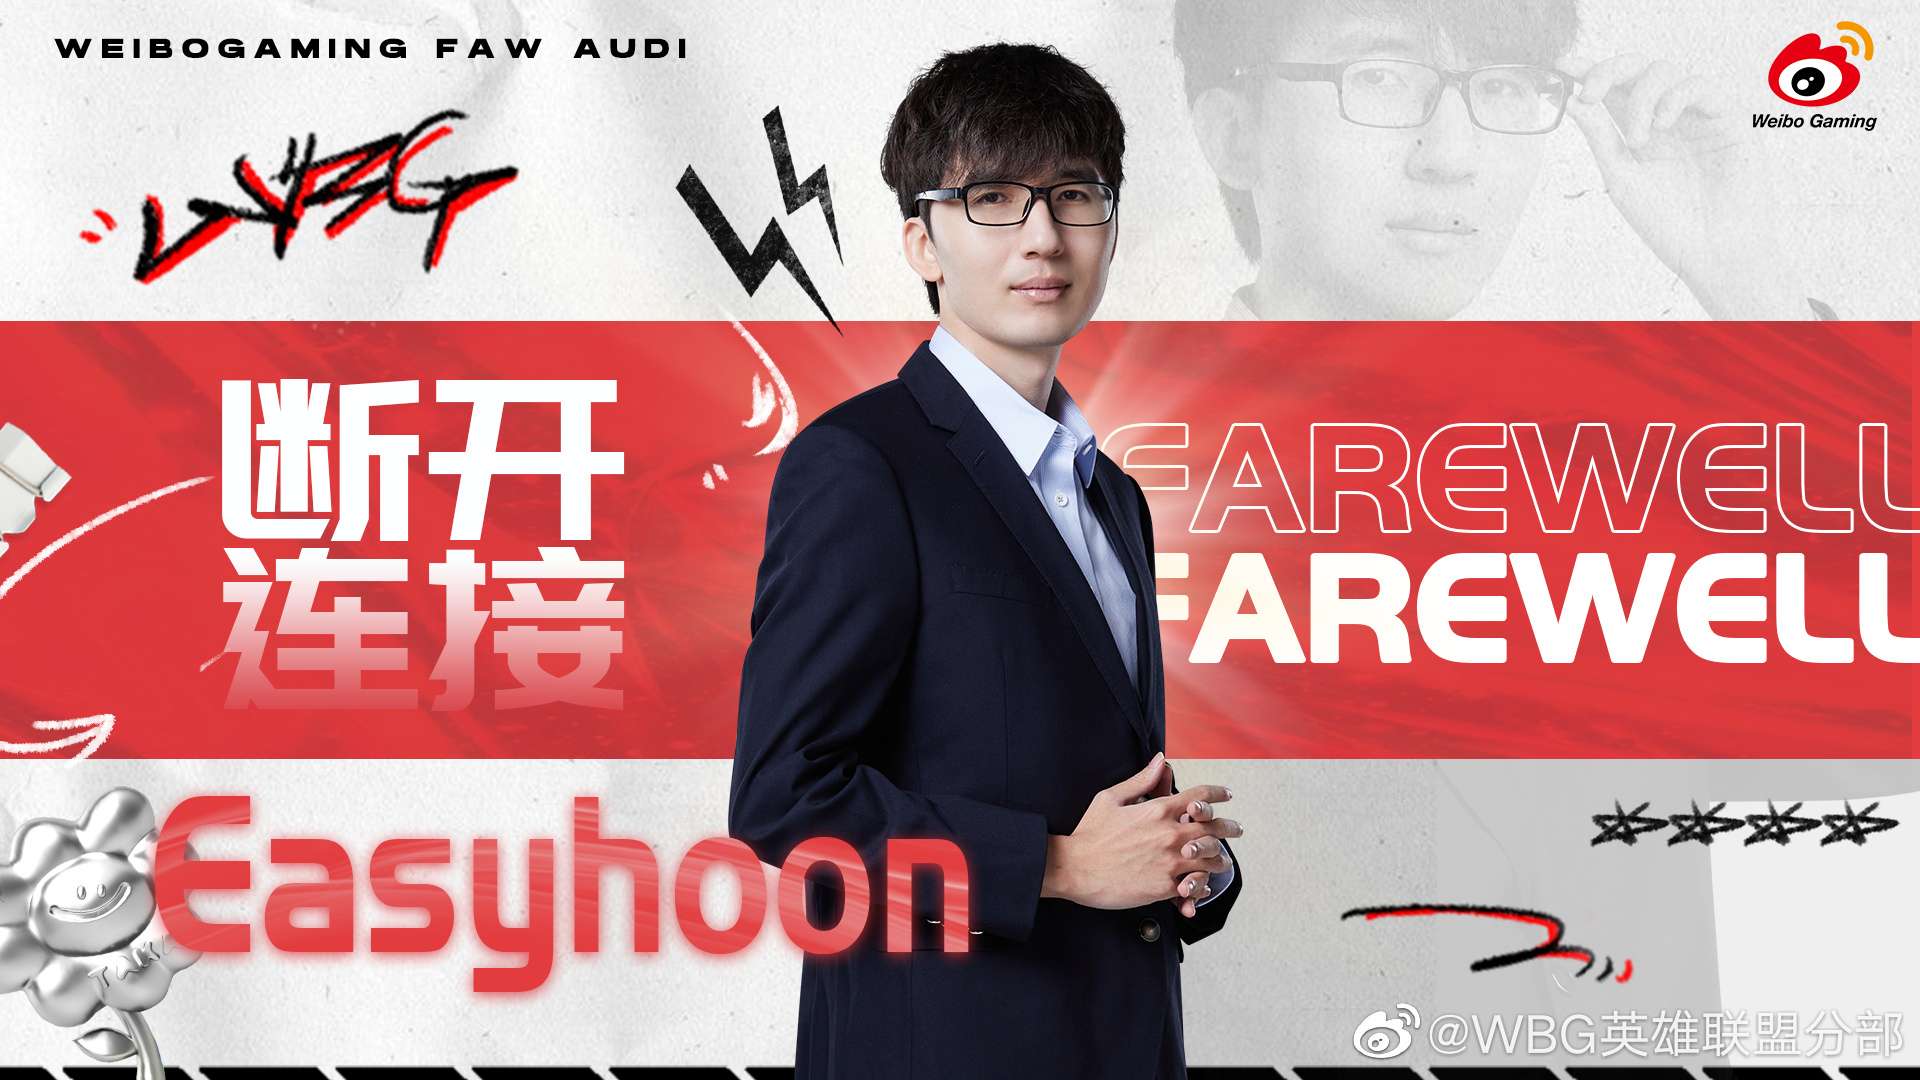 After the gloomy spring tournament, Weibo Gaming bid farewell to the coach as promised